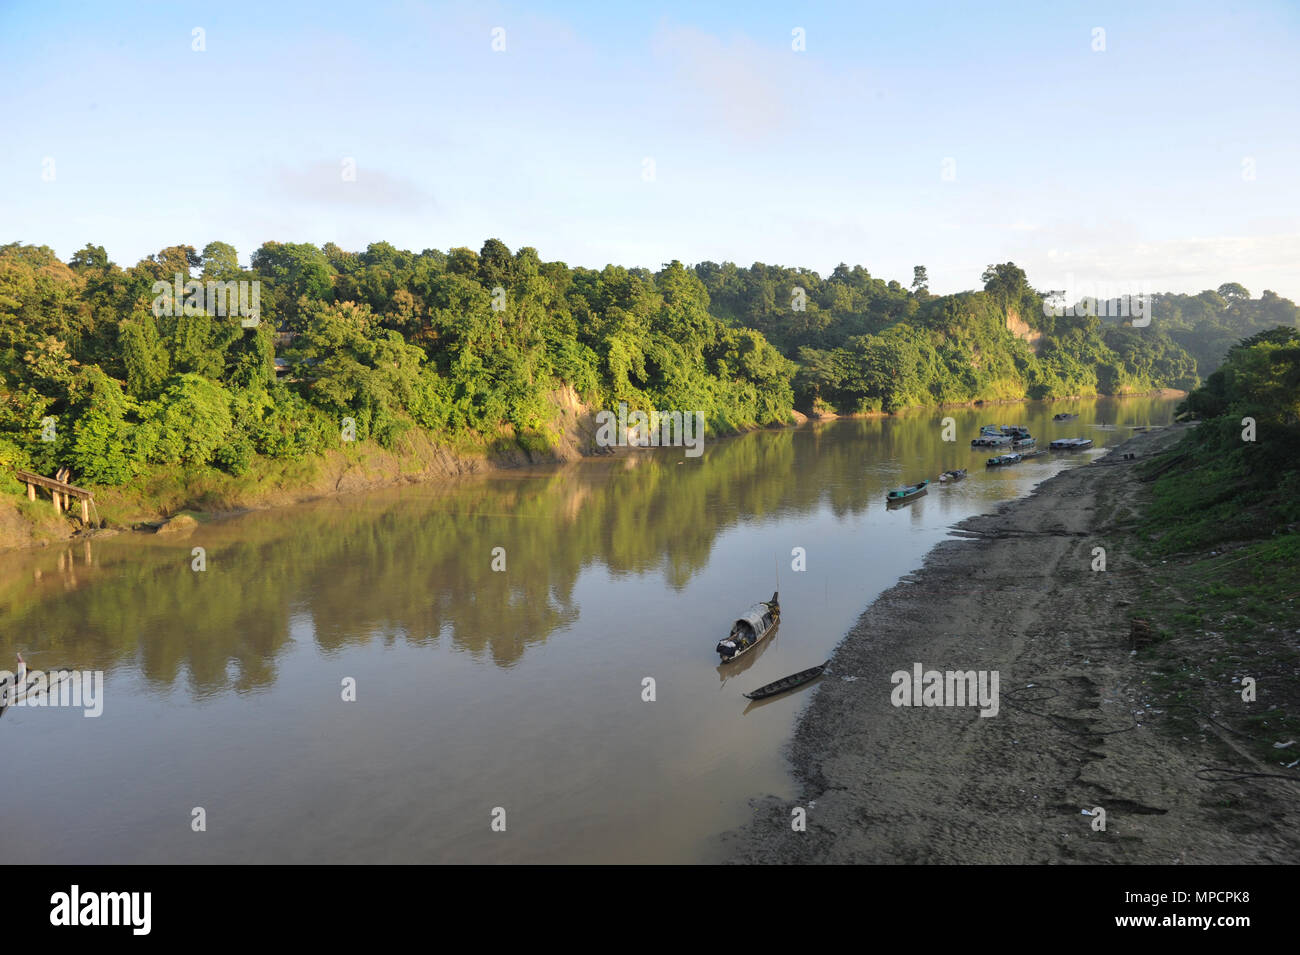 Bandarban, Bangladesh - September 30, 2010: The view of the Sangu River in Bandarban.  Bandarban is regarded as one of the most attractive travel dest Stock Photo